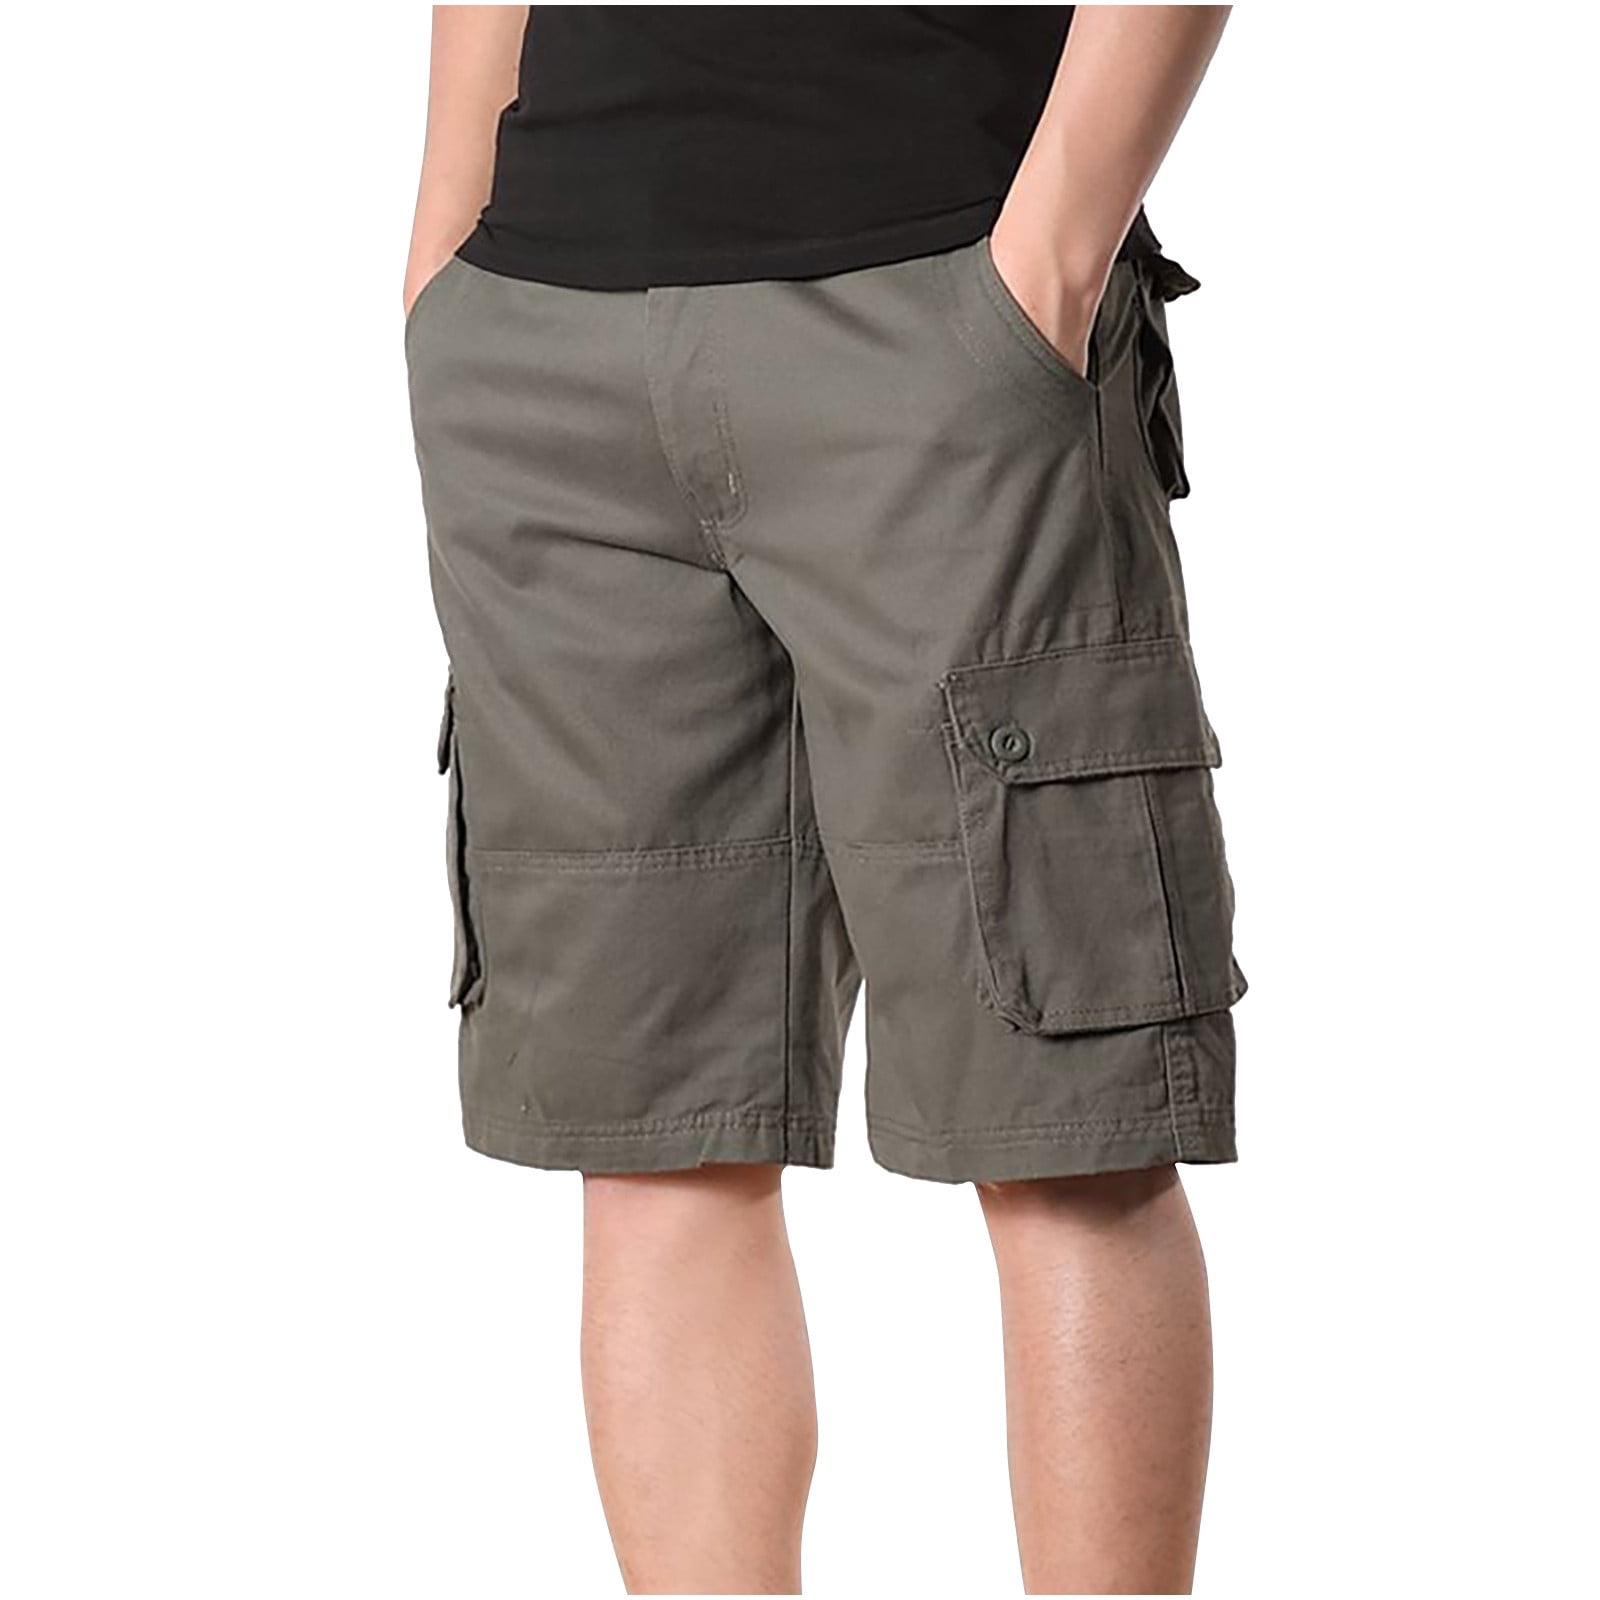  YKJATS Mens Tactical Shorts Stretch Outdoor Cargo